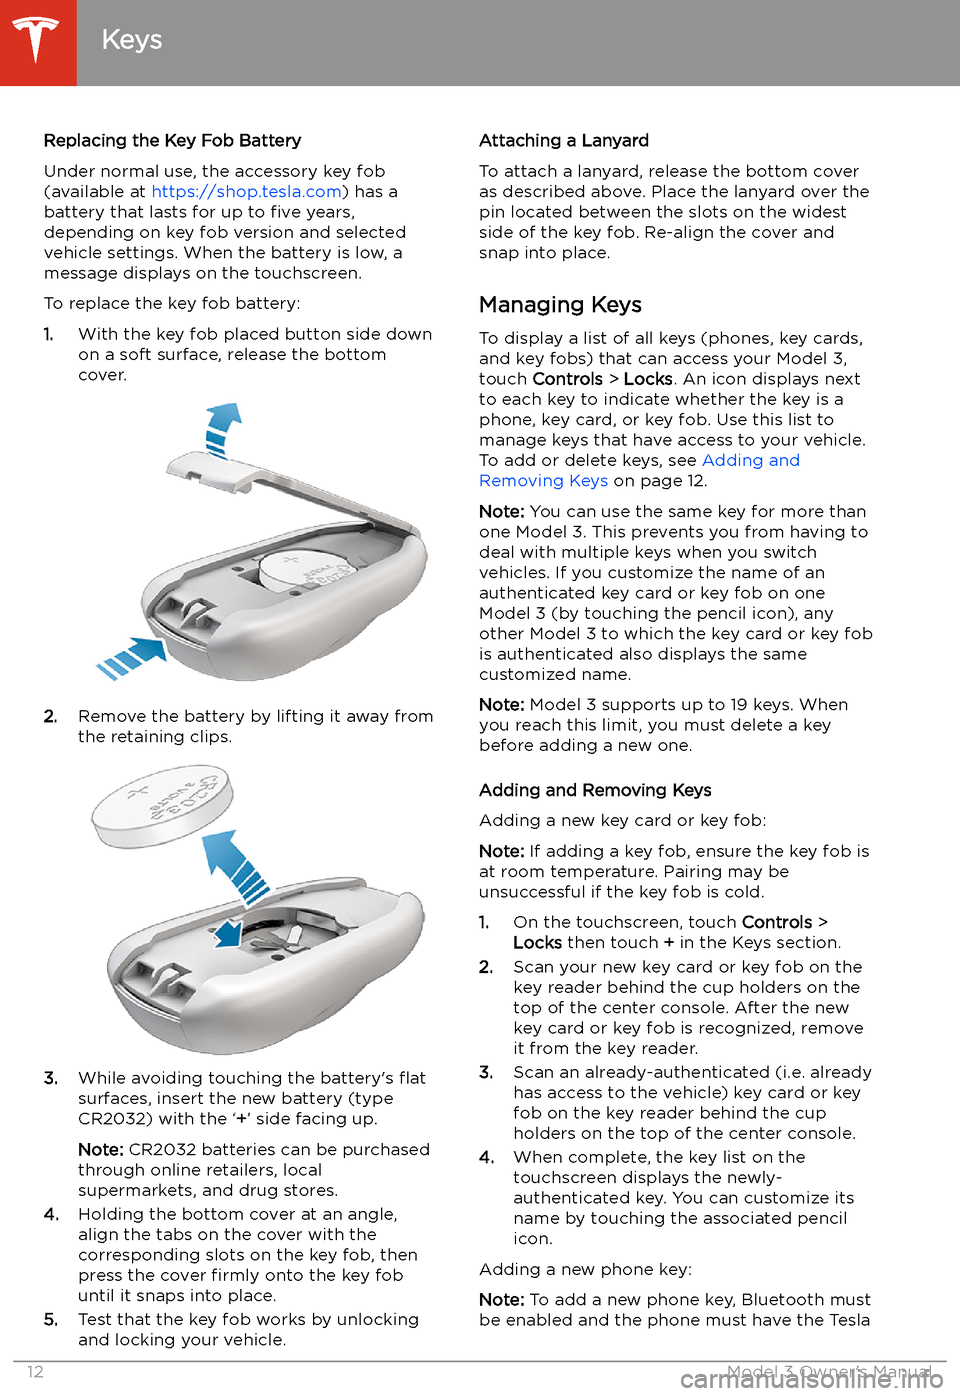 TESLA MODEL 3 2020  s User Guide Replacing the Key Fob Battery
Under normal use, the accessory key fob
(available at  https://shop.tesla.com ) has a
battery that lasts for up to  five years,
depending on key fob version and selected
